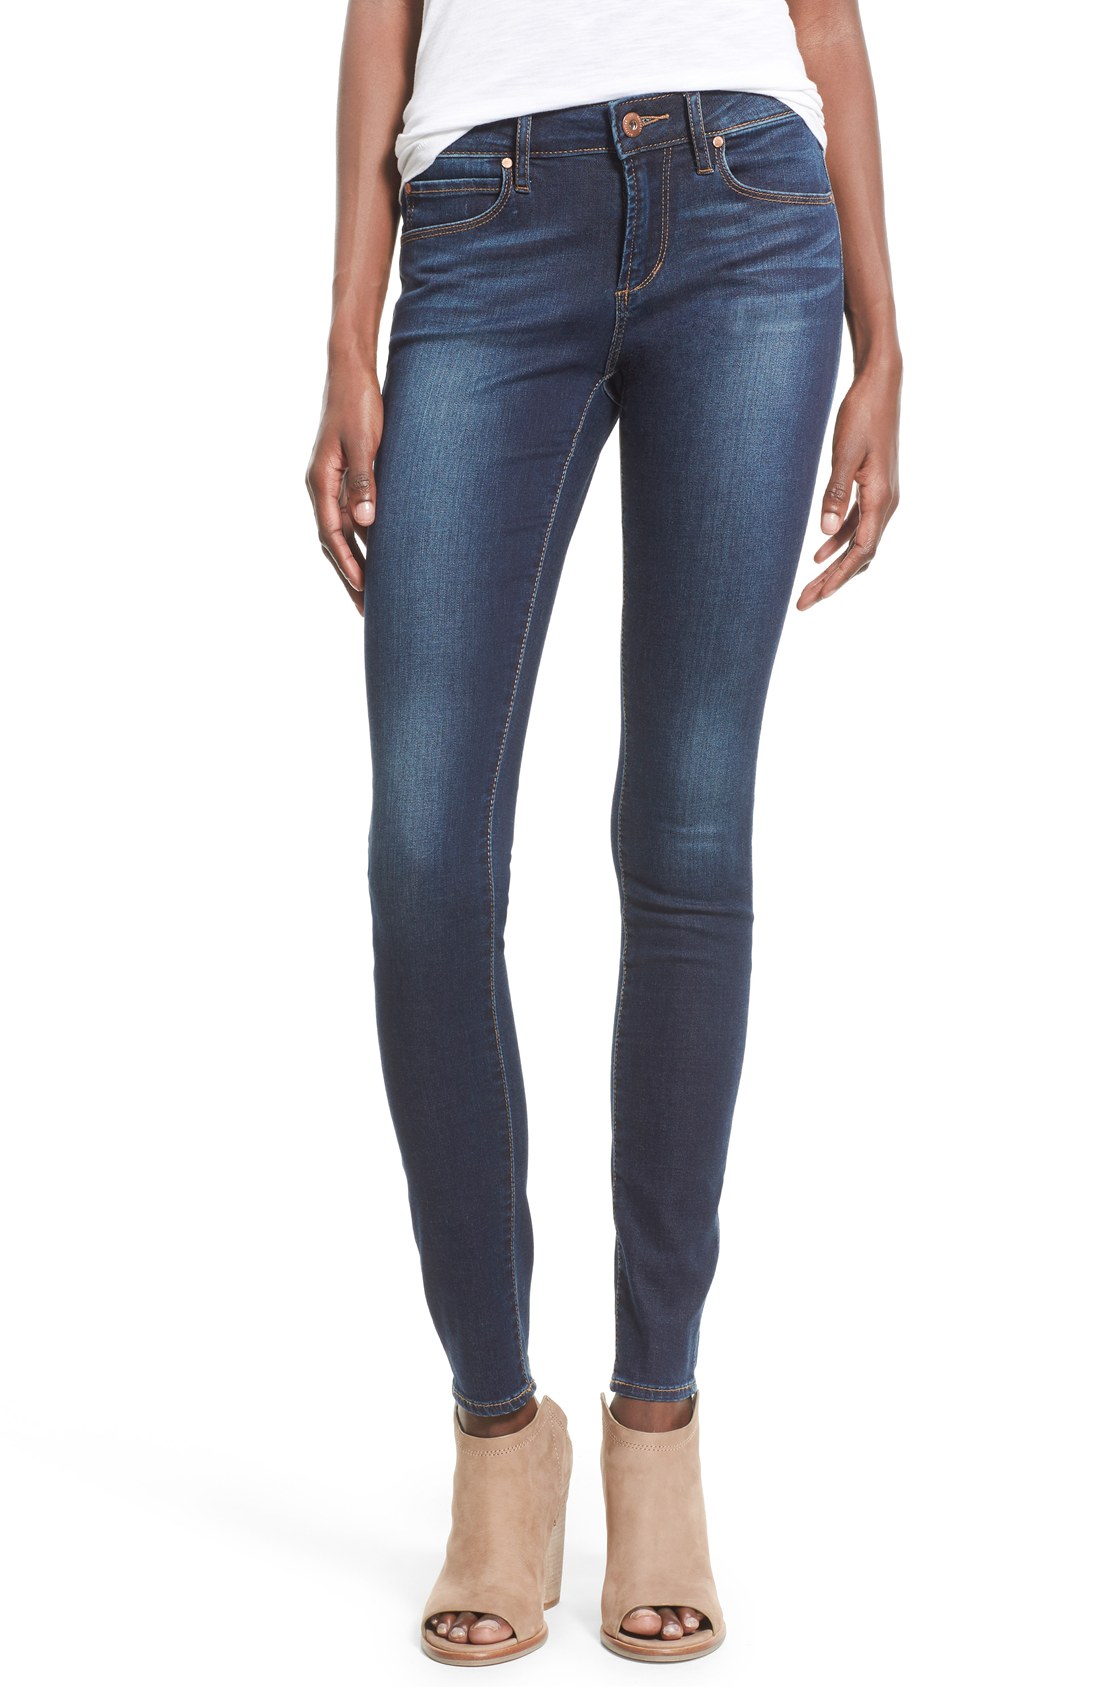 Womens Jeans – All the Types and Version – careyfashion.com